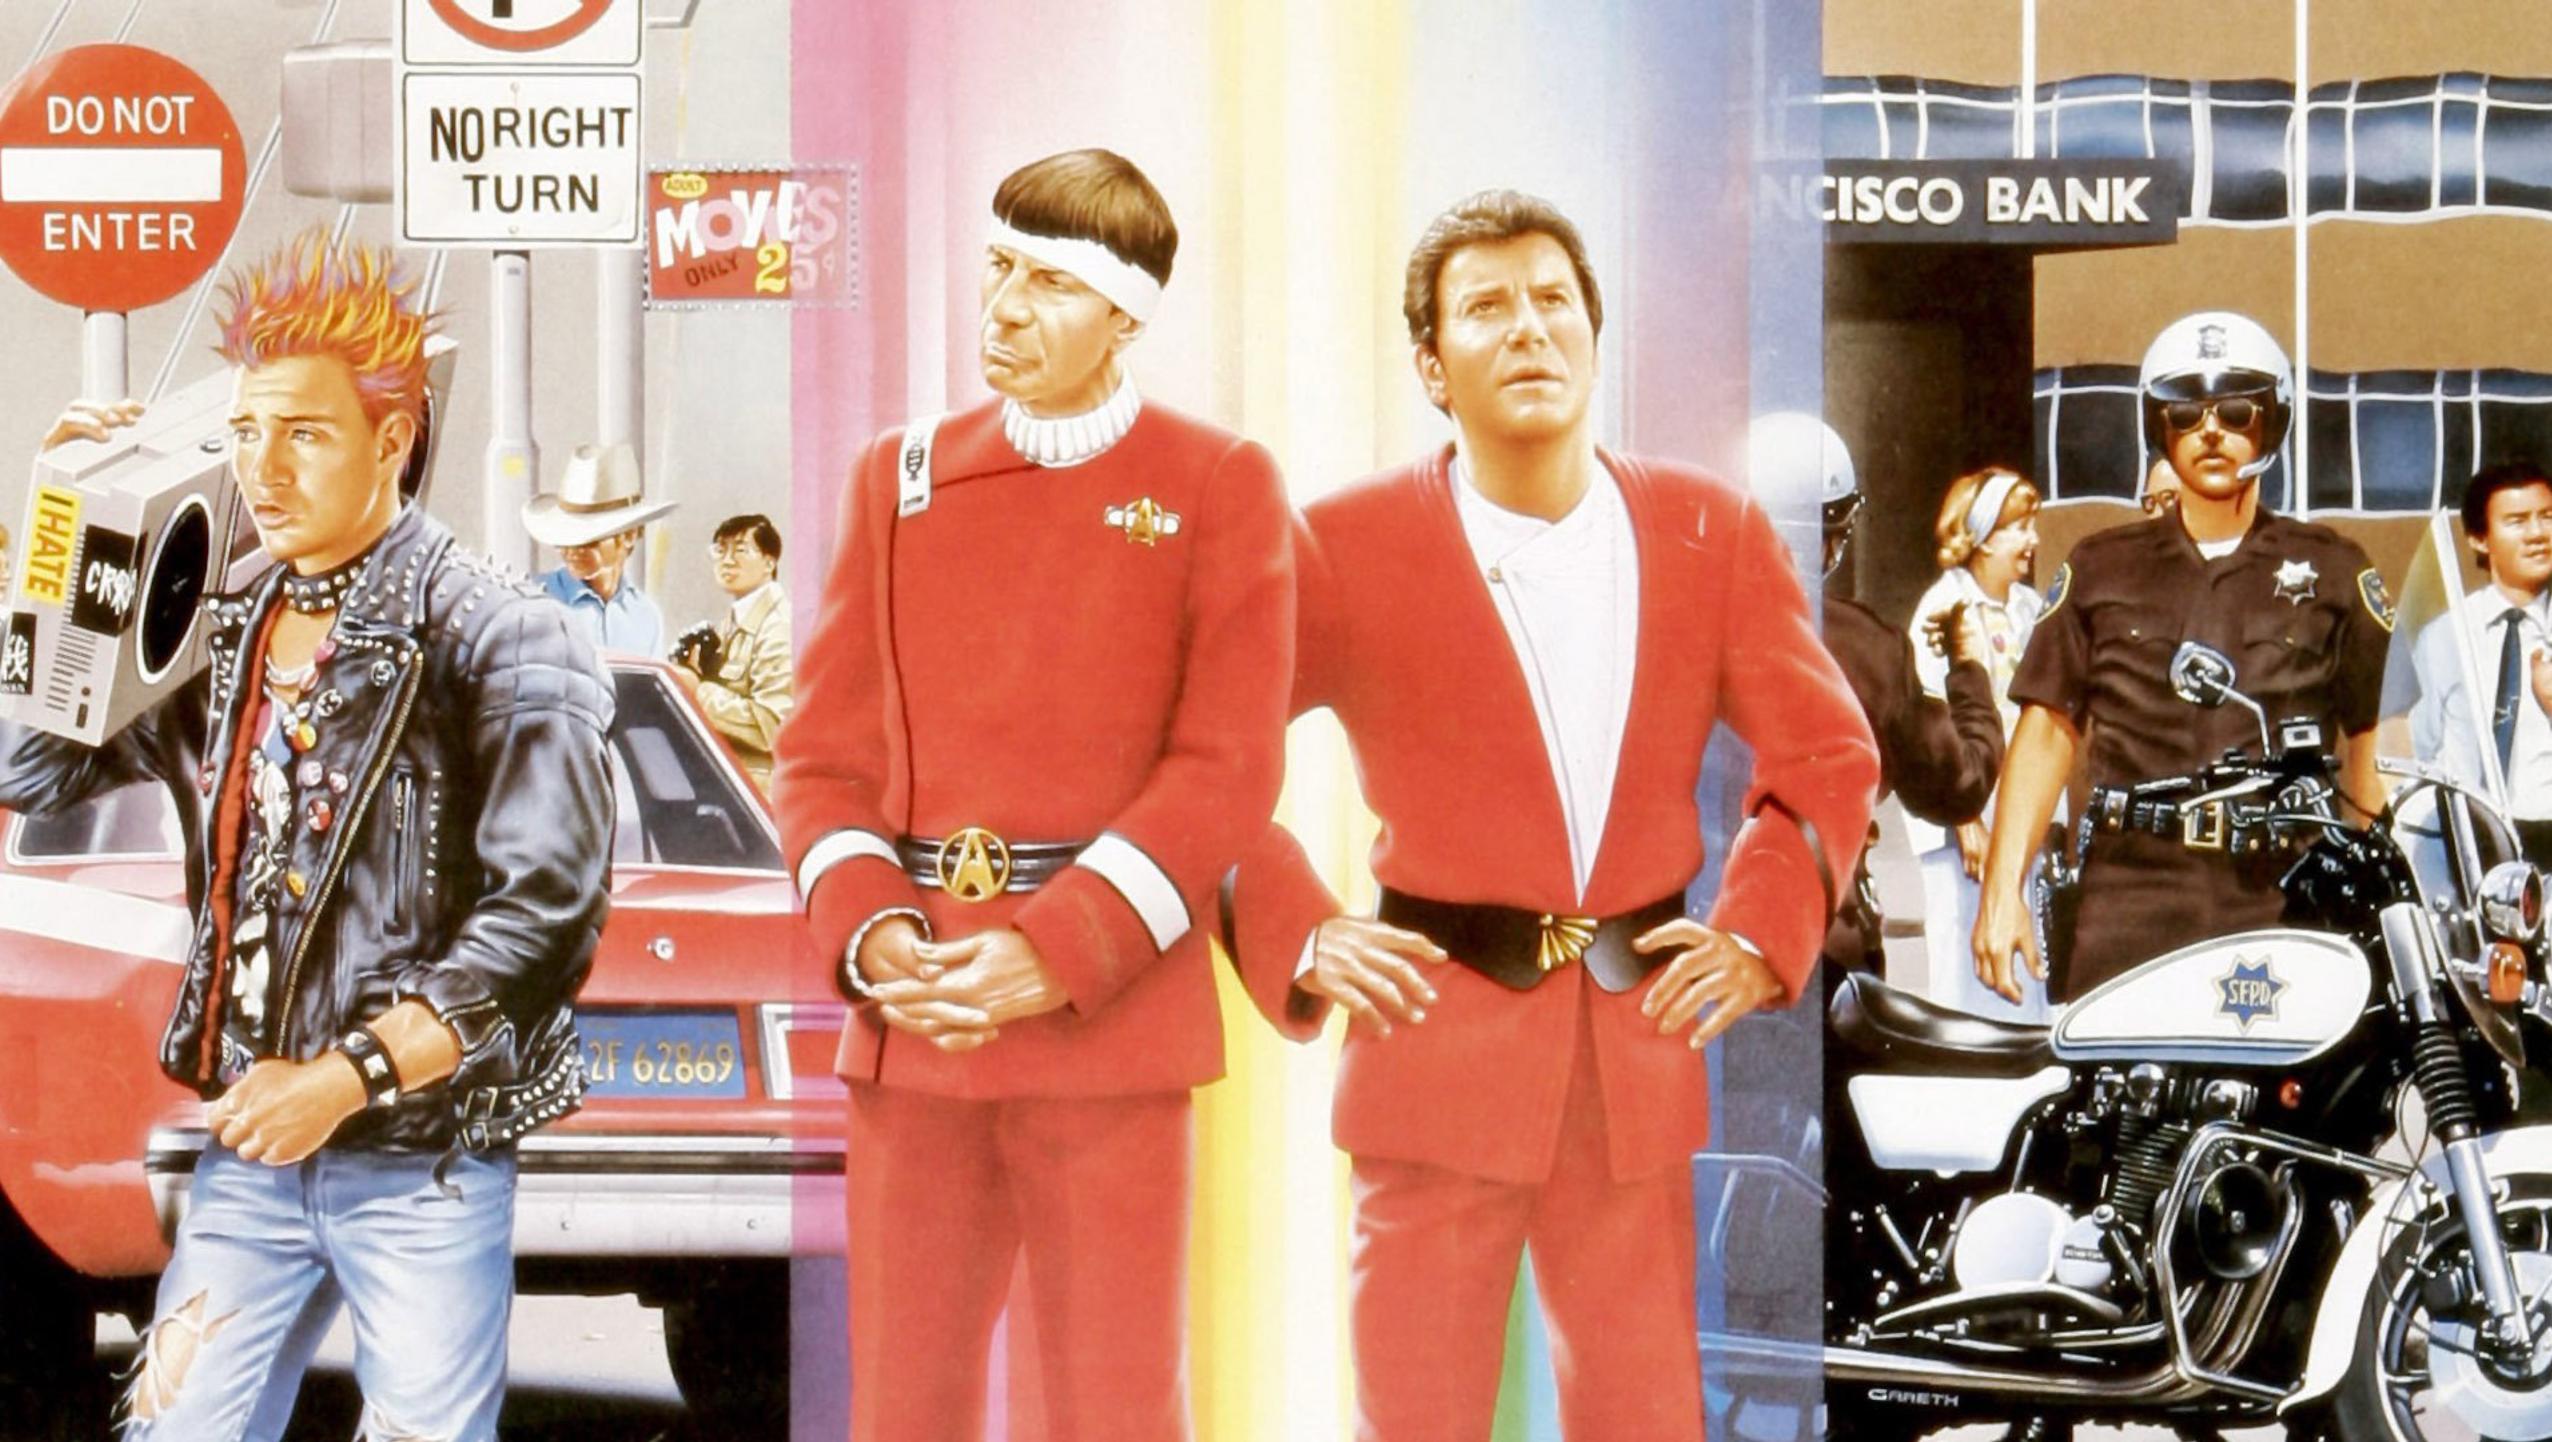 Star Trek Iv: The Voyage Home Wallpapers